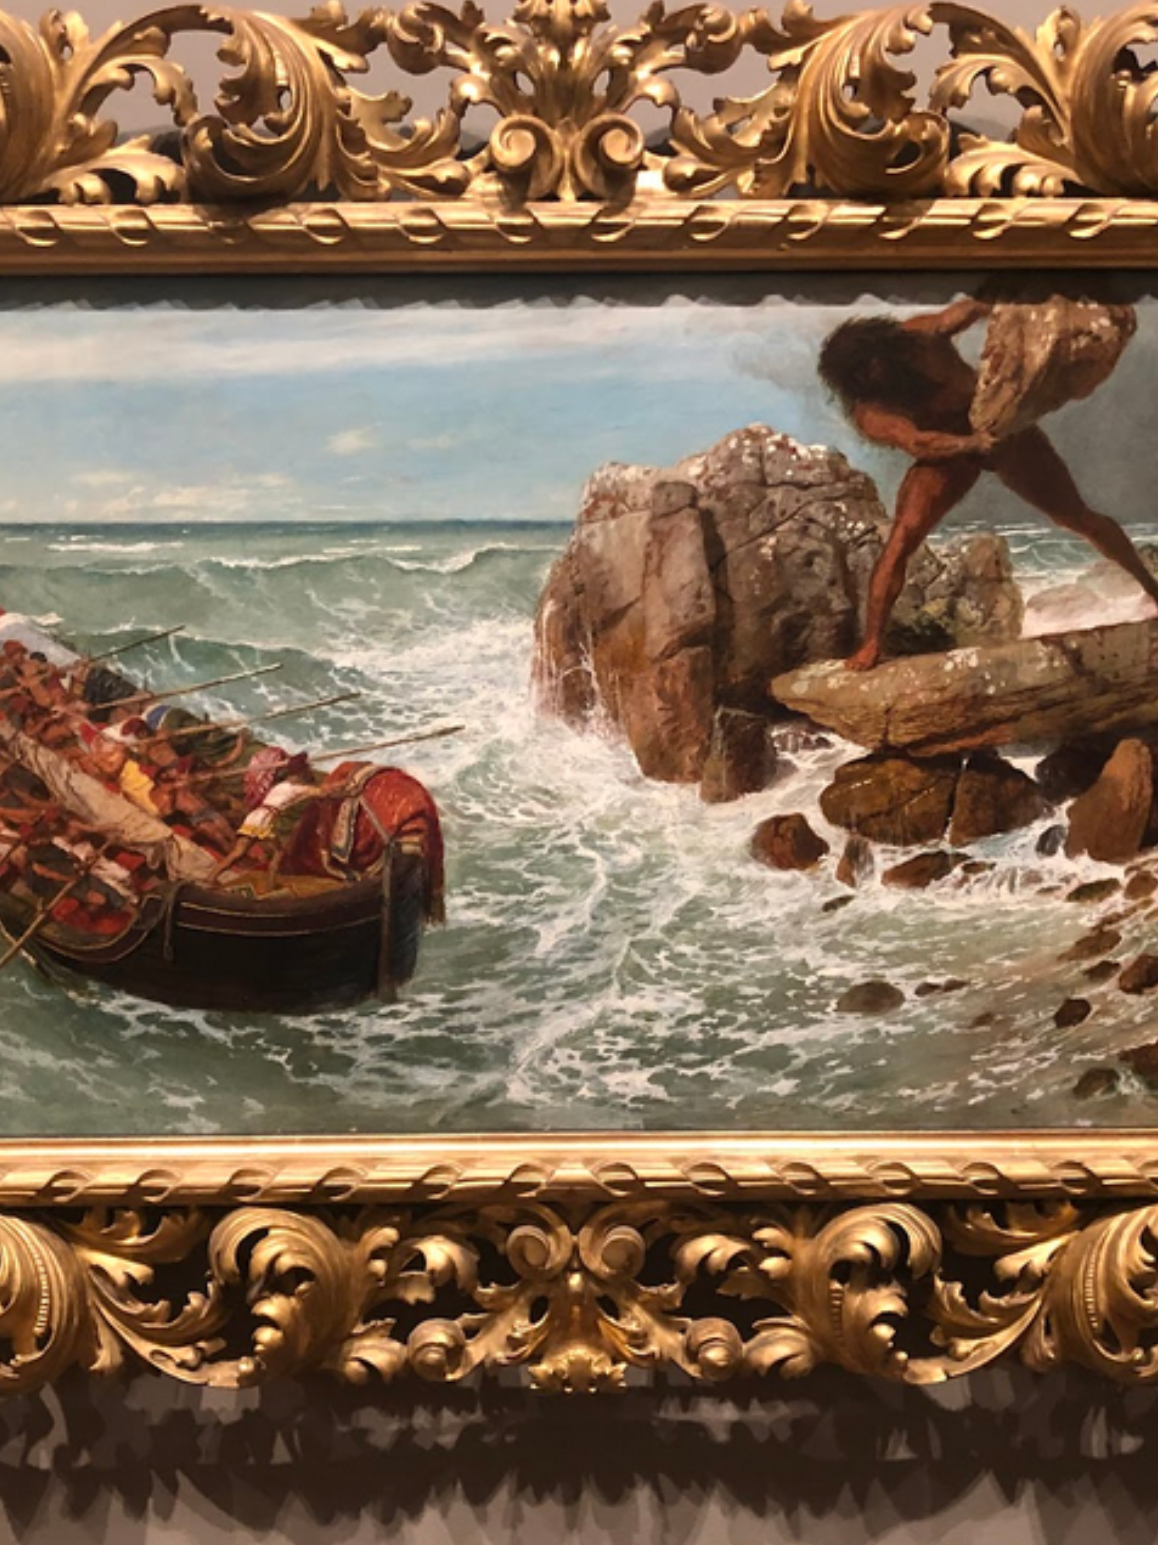 An oil painting at the Museum of Fine Arts Boston depicts the mythological scene of a giant, moving to hurl a stone at a ship full of sailors on a turbulent sea.